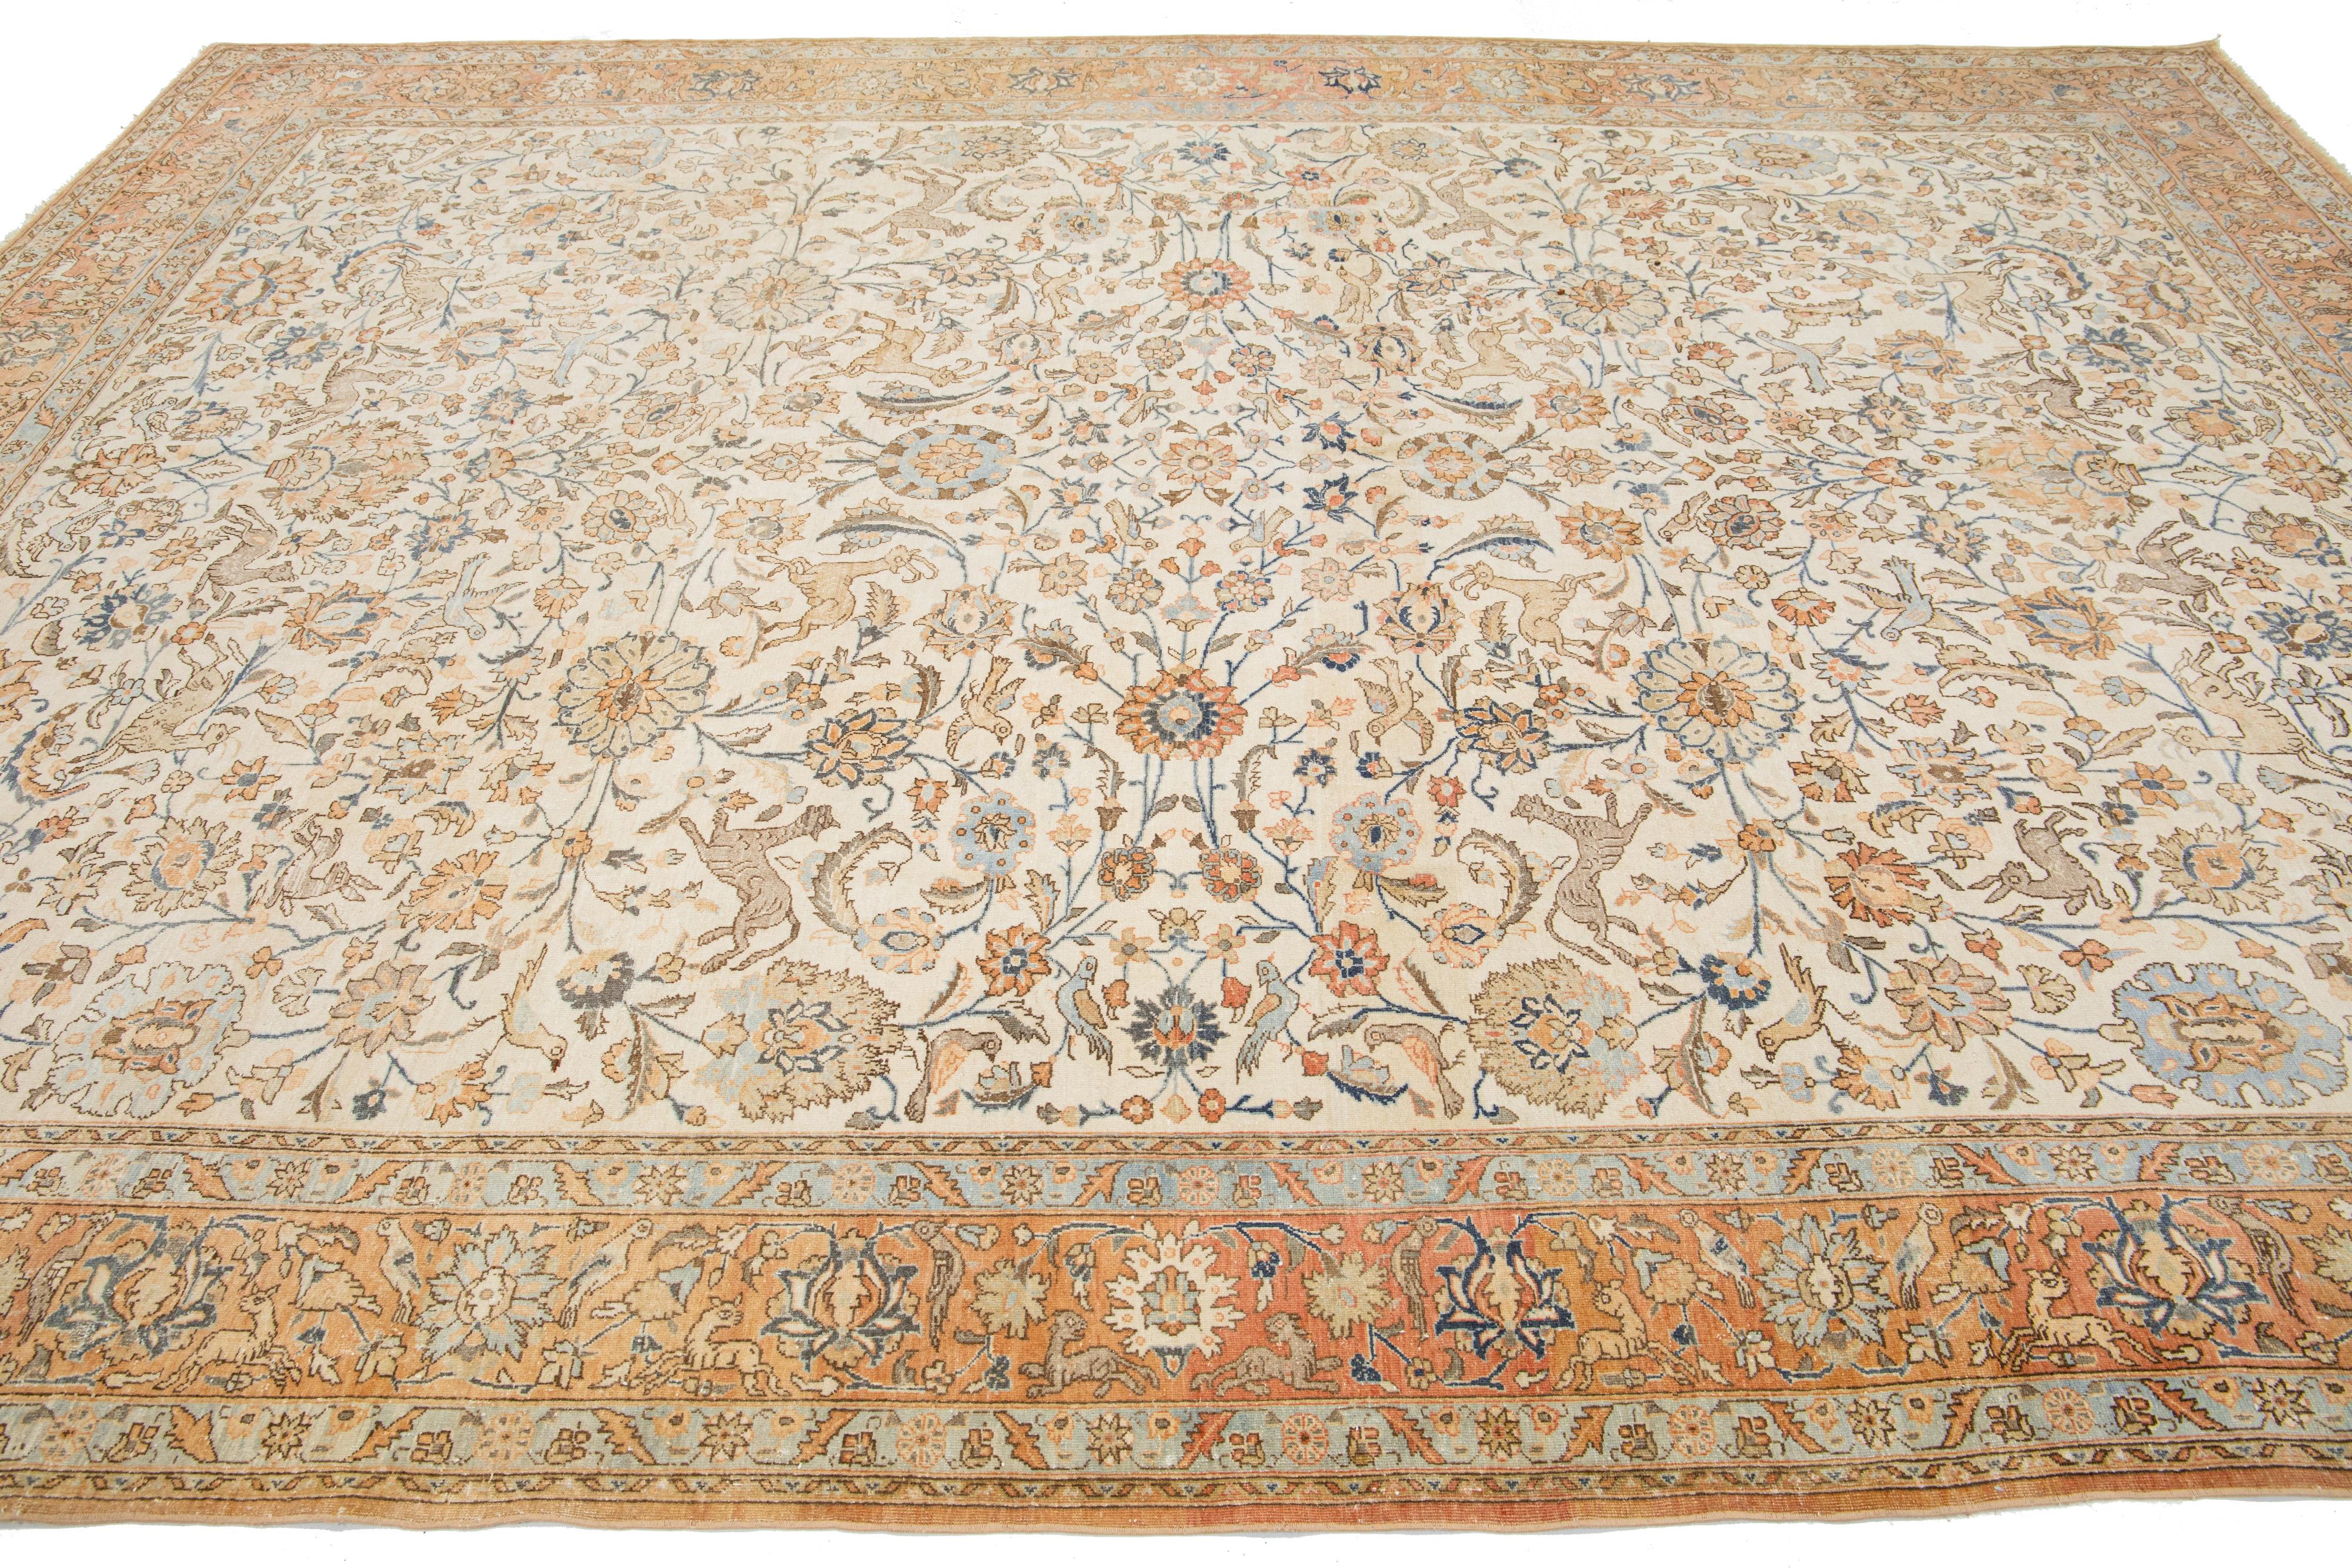 Floral Designed Antique Persian Tabriz Wool Rug Handmade In Beige and Orange In Excellent Condition For Sale In Norwalk, CT